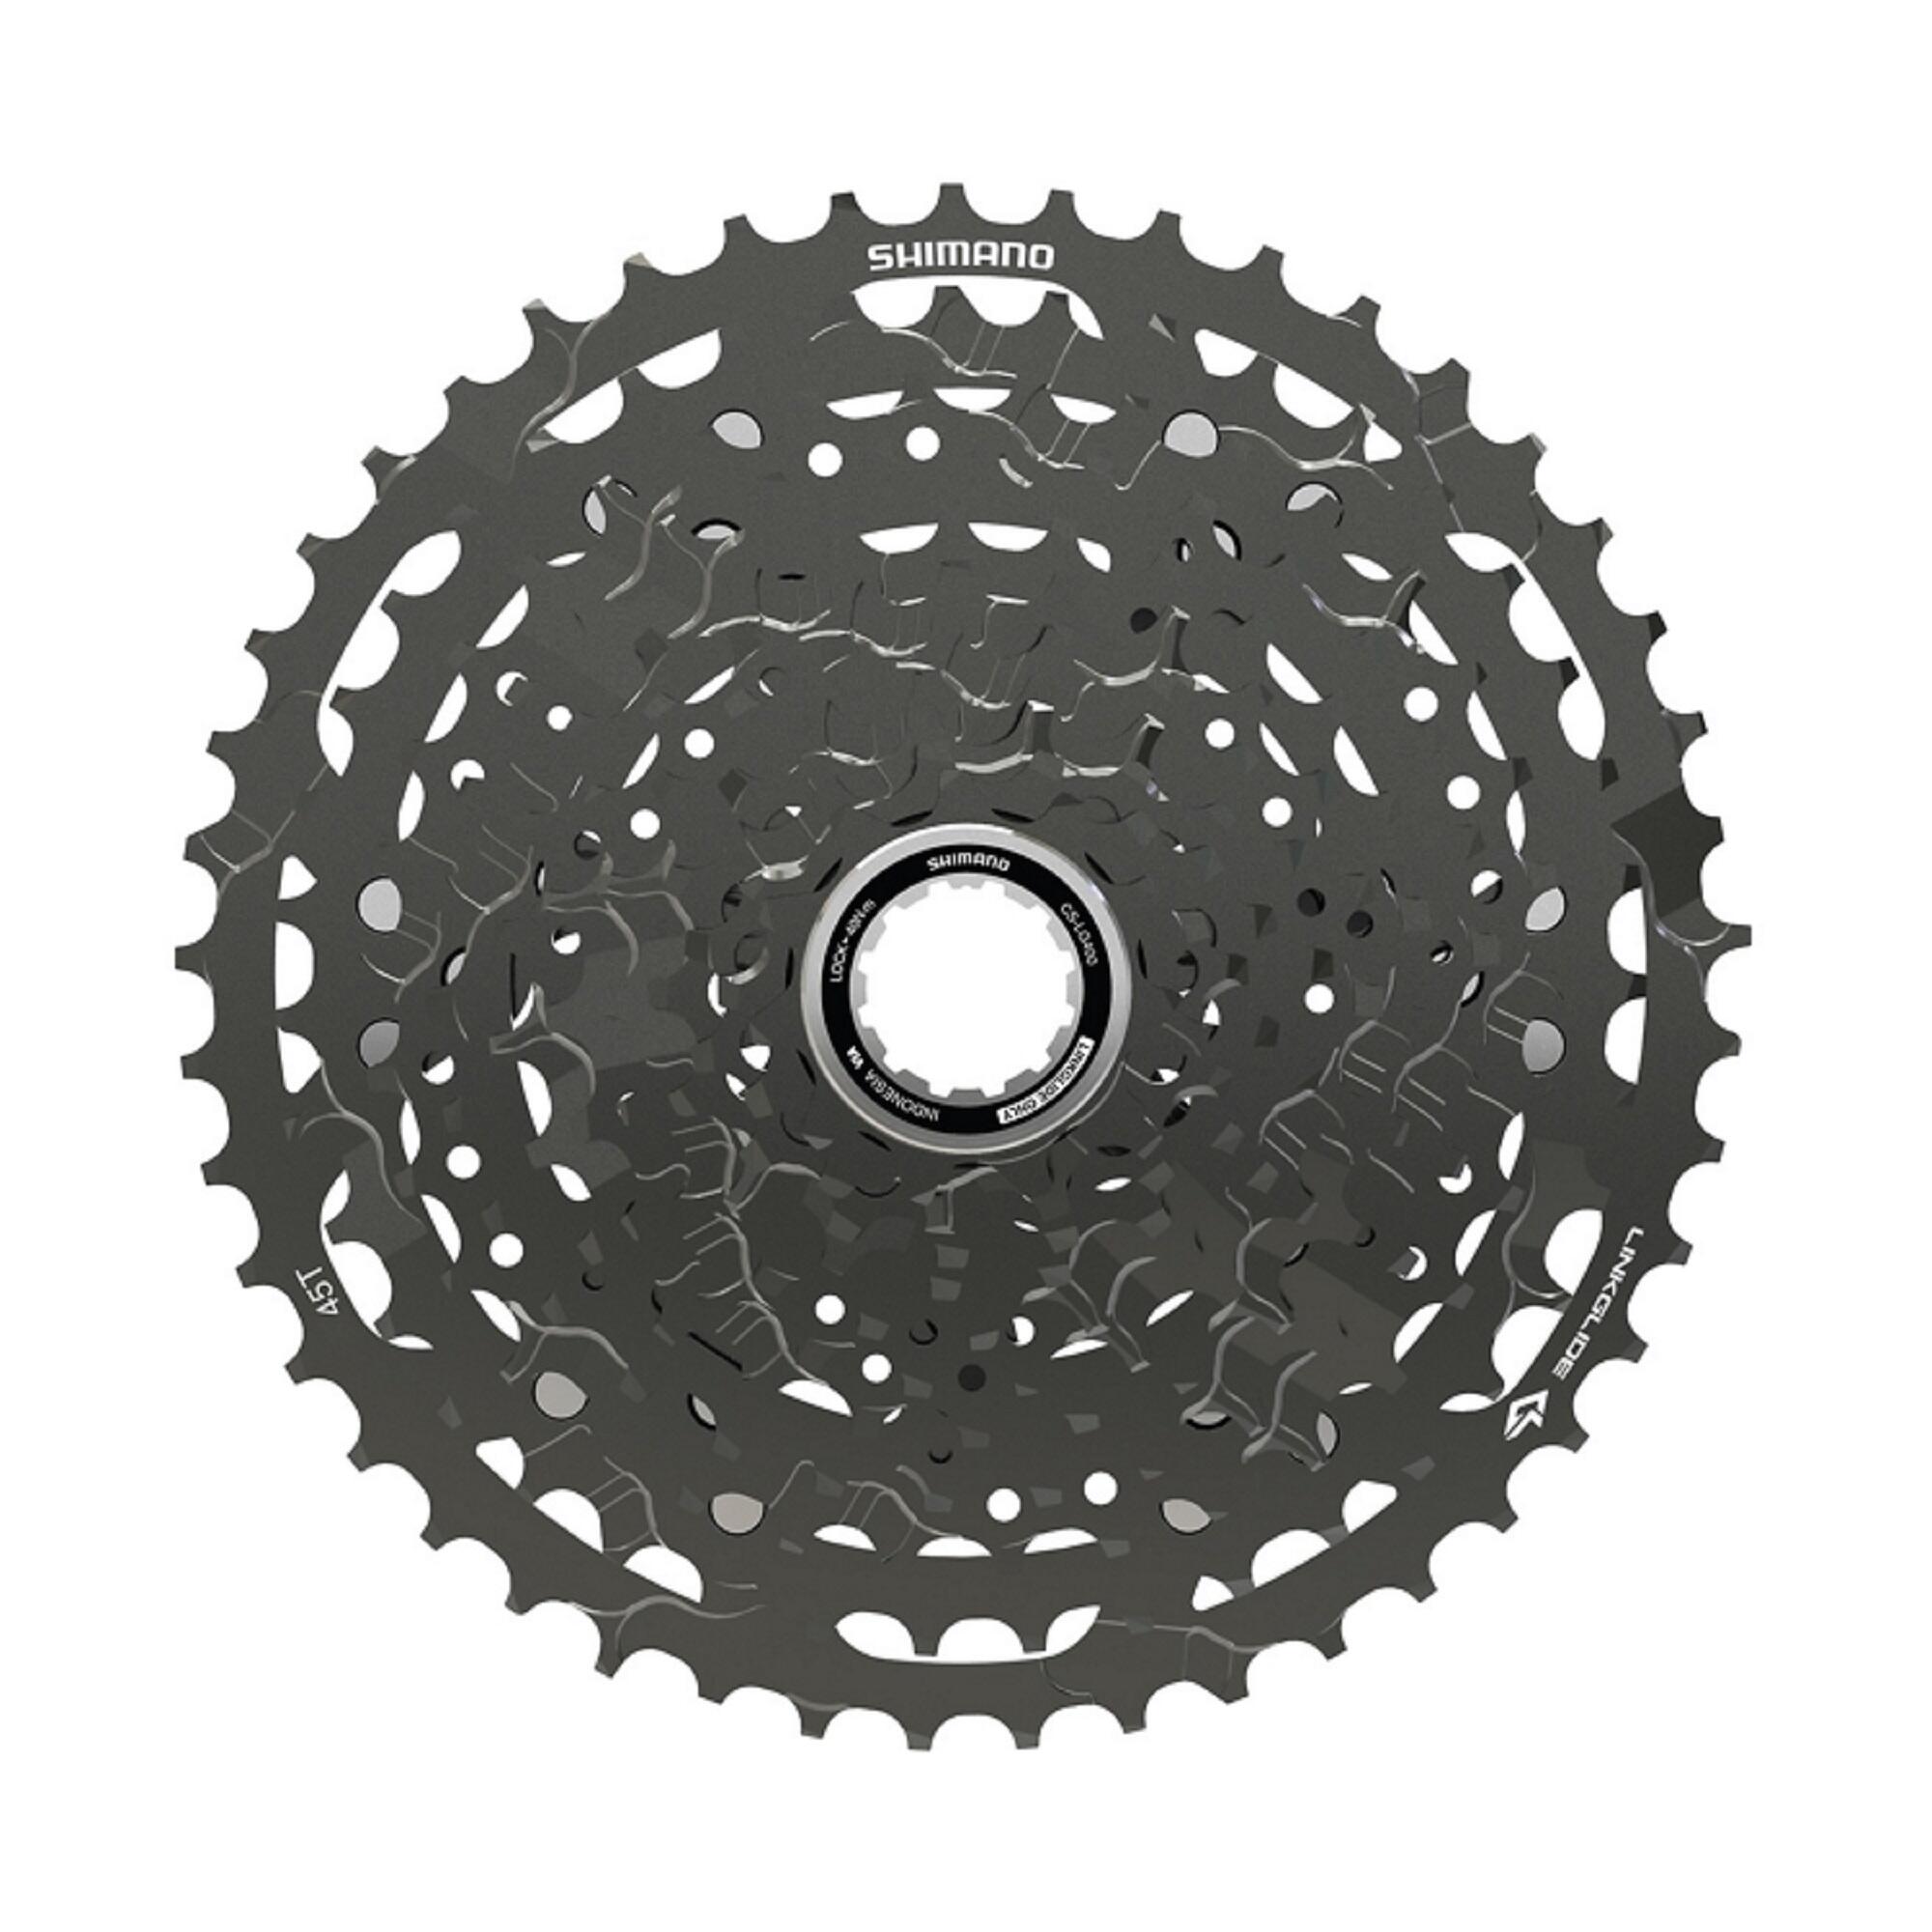 11-Speed 11x50 Cassette Cues LG400 1/1